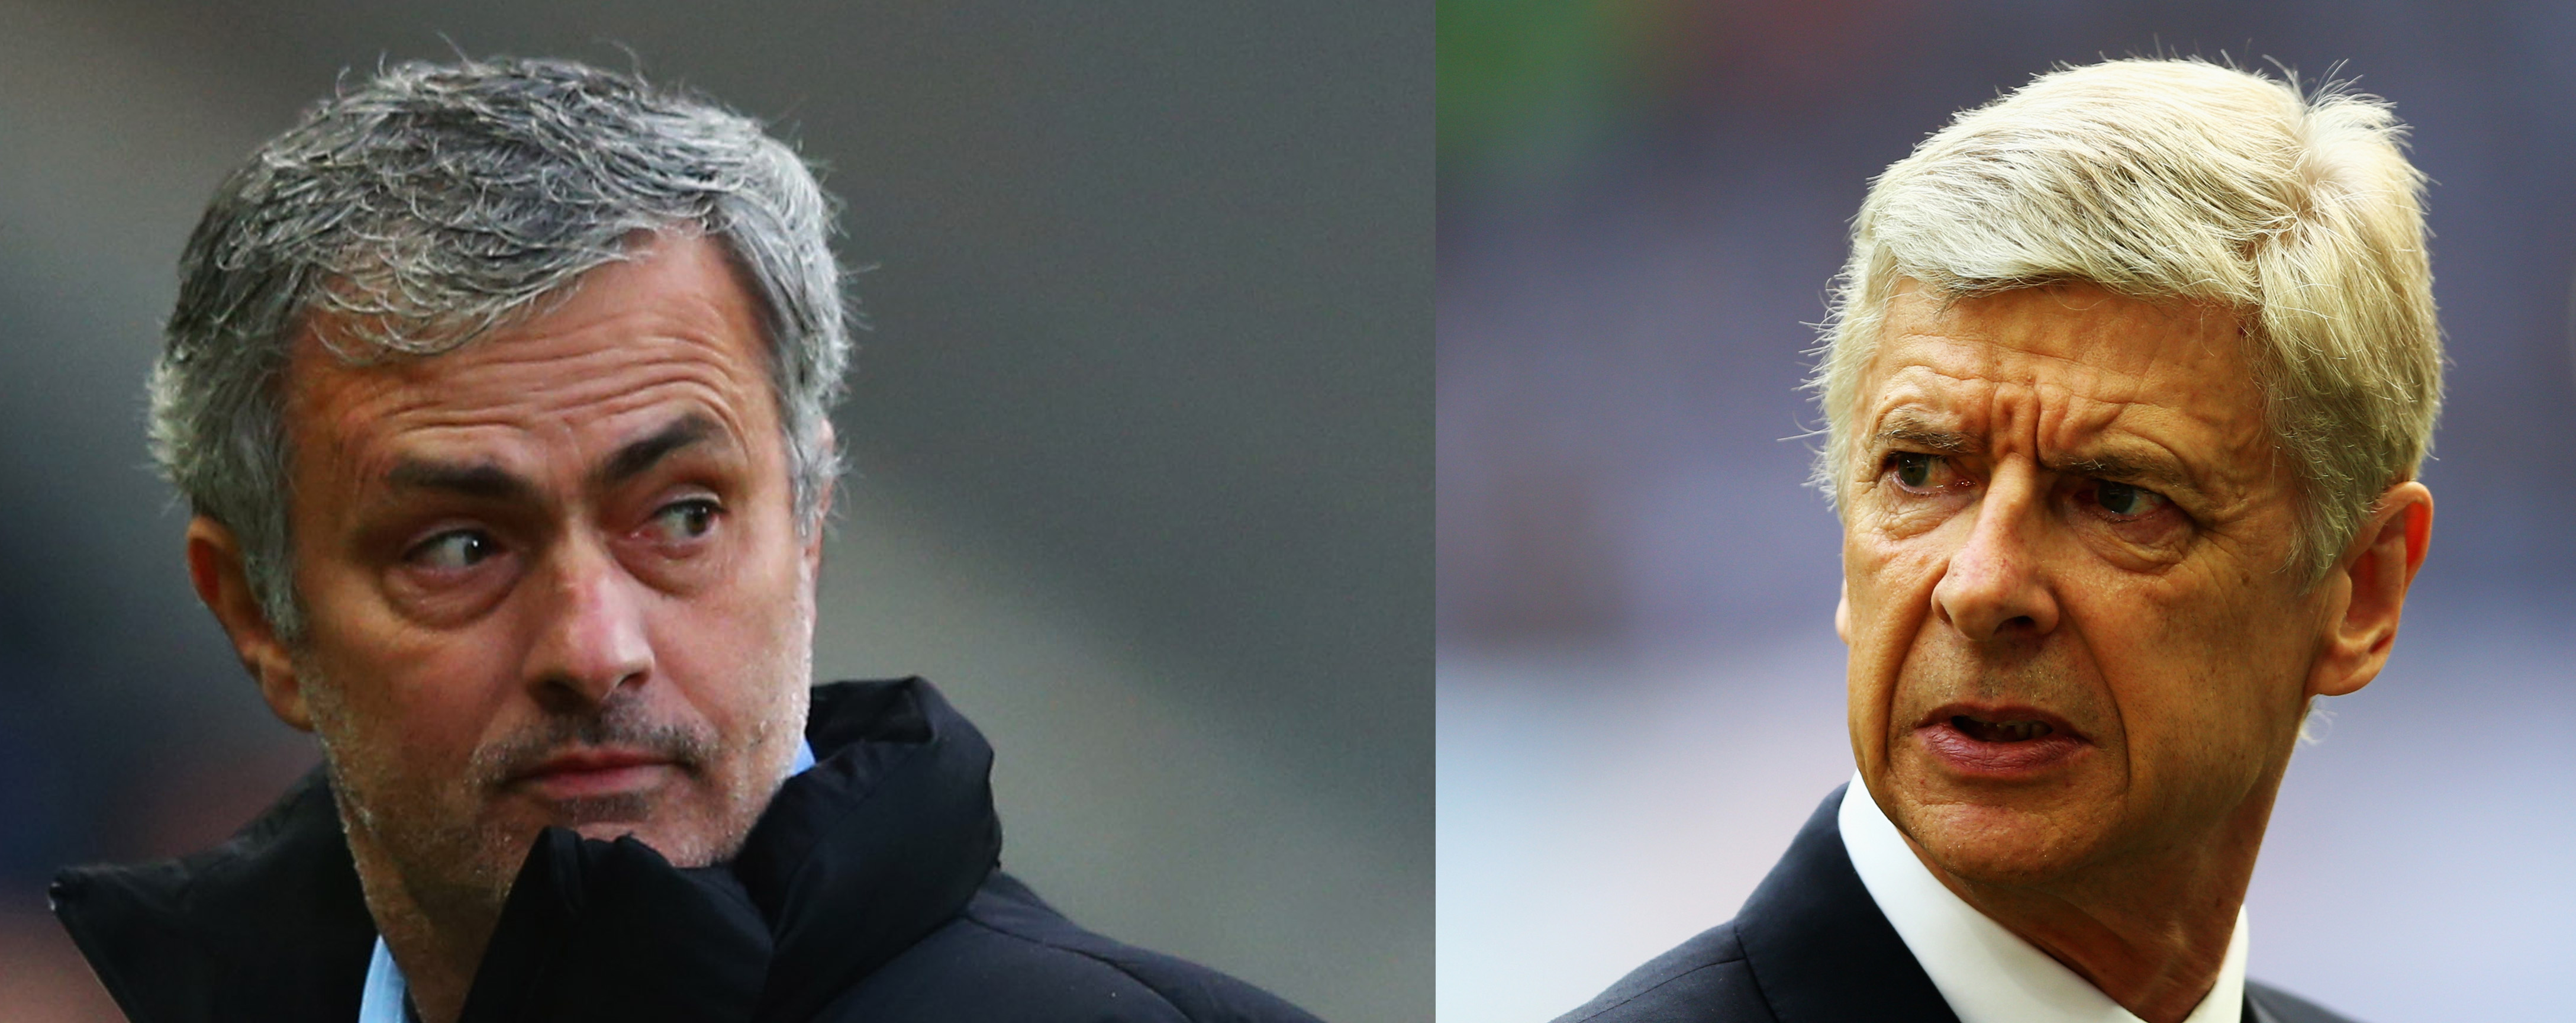 (FILE PHOTO - Image Numbers 467249794 (L) and 475265162) In this composite image a comparison has been made between Jose Mourinho manager of Chelsea and Arsene Wenger manager of Arsenal , Chelsea and Arsenal meet in the season opening match the FA Community Shield at Wembley Stadium on August 2, 2015 in London,England. Traditionally the match is between the Premier League Champions and the FA Cup Winners of the previous season. ***LEFT IMAGE*** HULL, ENGLAND - MARCH 22: Jose Mourinho manager of Chelsea looks thoughtful during the Barclays Premier League match between Hull City and Chelsea at KC Stadium on March 22, 2015 in Hull, England. (Photo by Matthew Lewis/Getty Images) ***RIGHT IMAGE***  LONDON, ENGLAND - MAY 30: Arsene Wenger manager of Arsenal looks on prior to during the FA Cup Final between Aston Villa and Arsenal at Wembley Stadium on May 30, 2015 in London, England. (Photo by Paul Gilham/Getty Images)